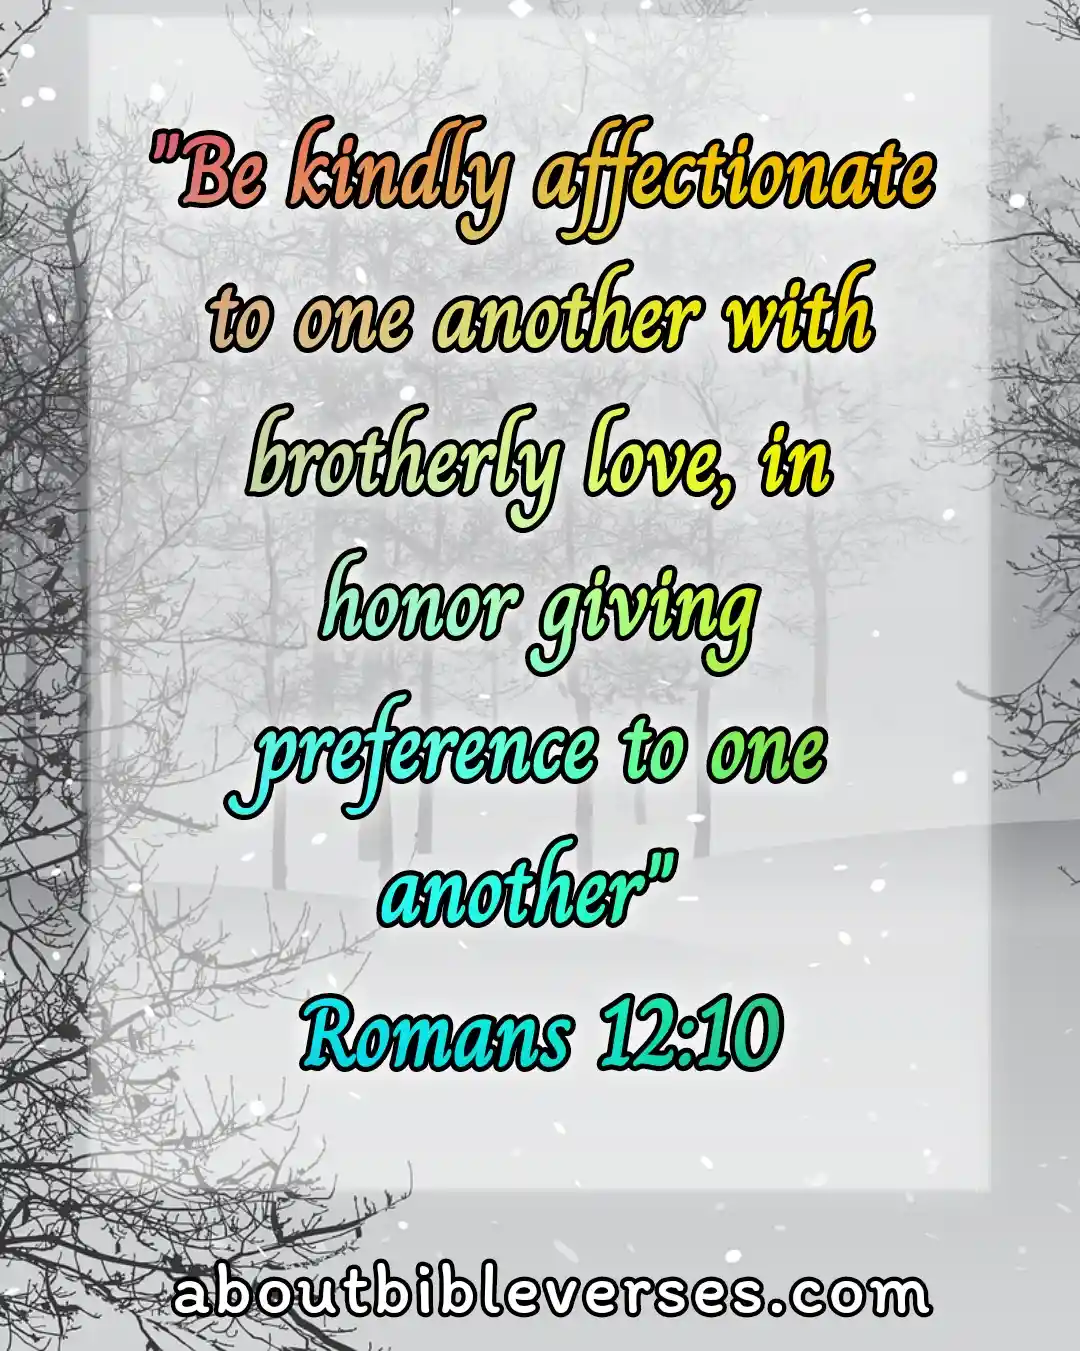 Bible Verses About Attitude Towards Others (Romans 12:10)